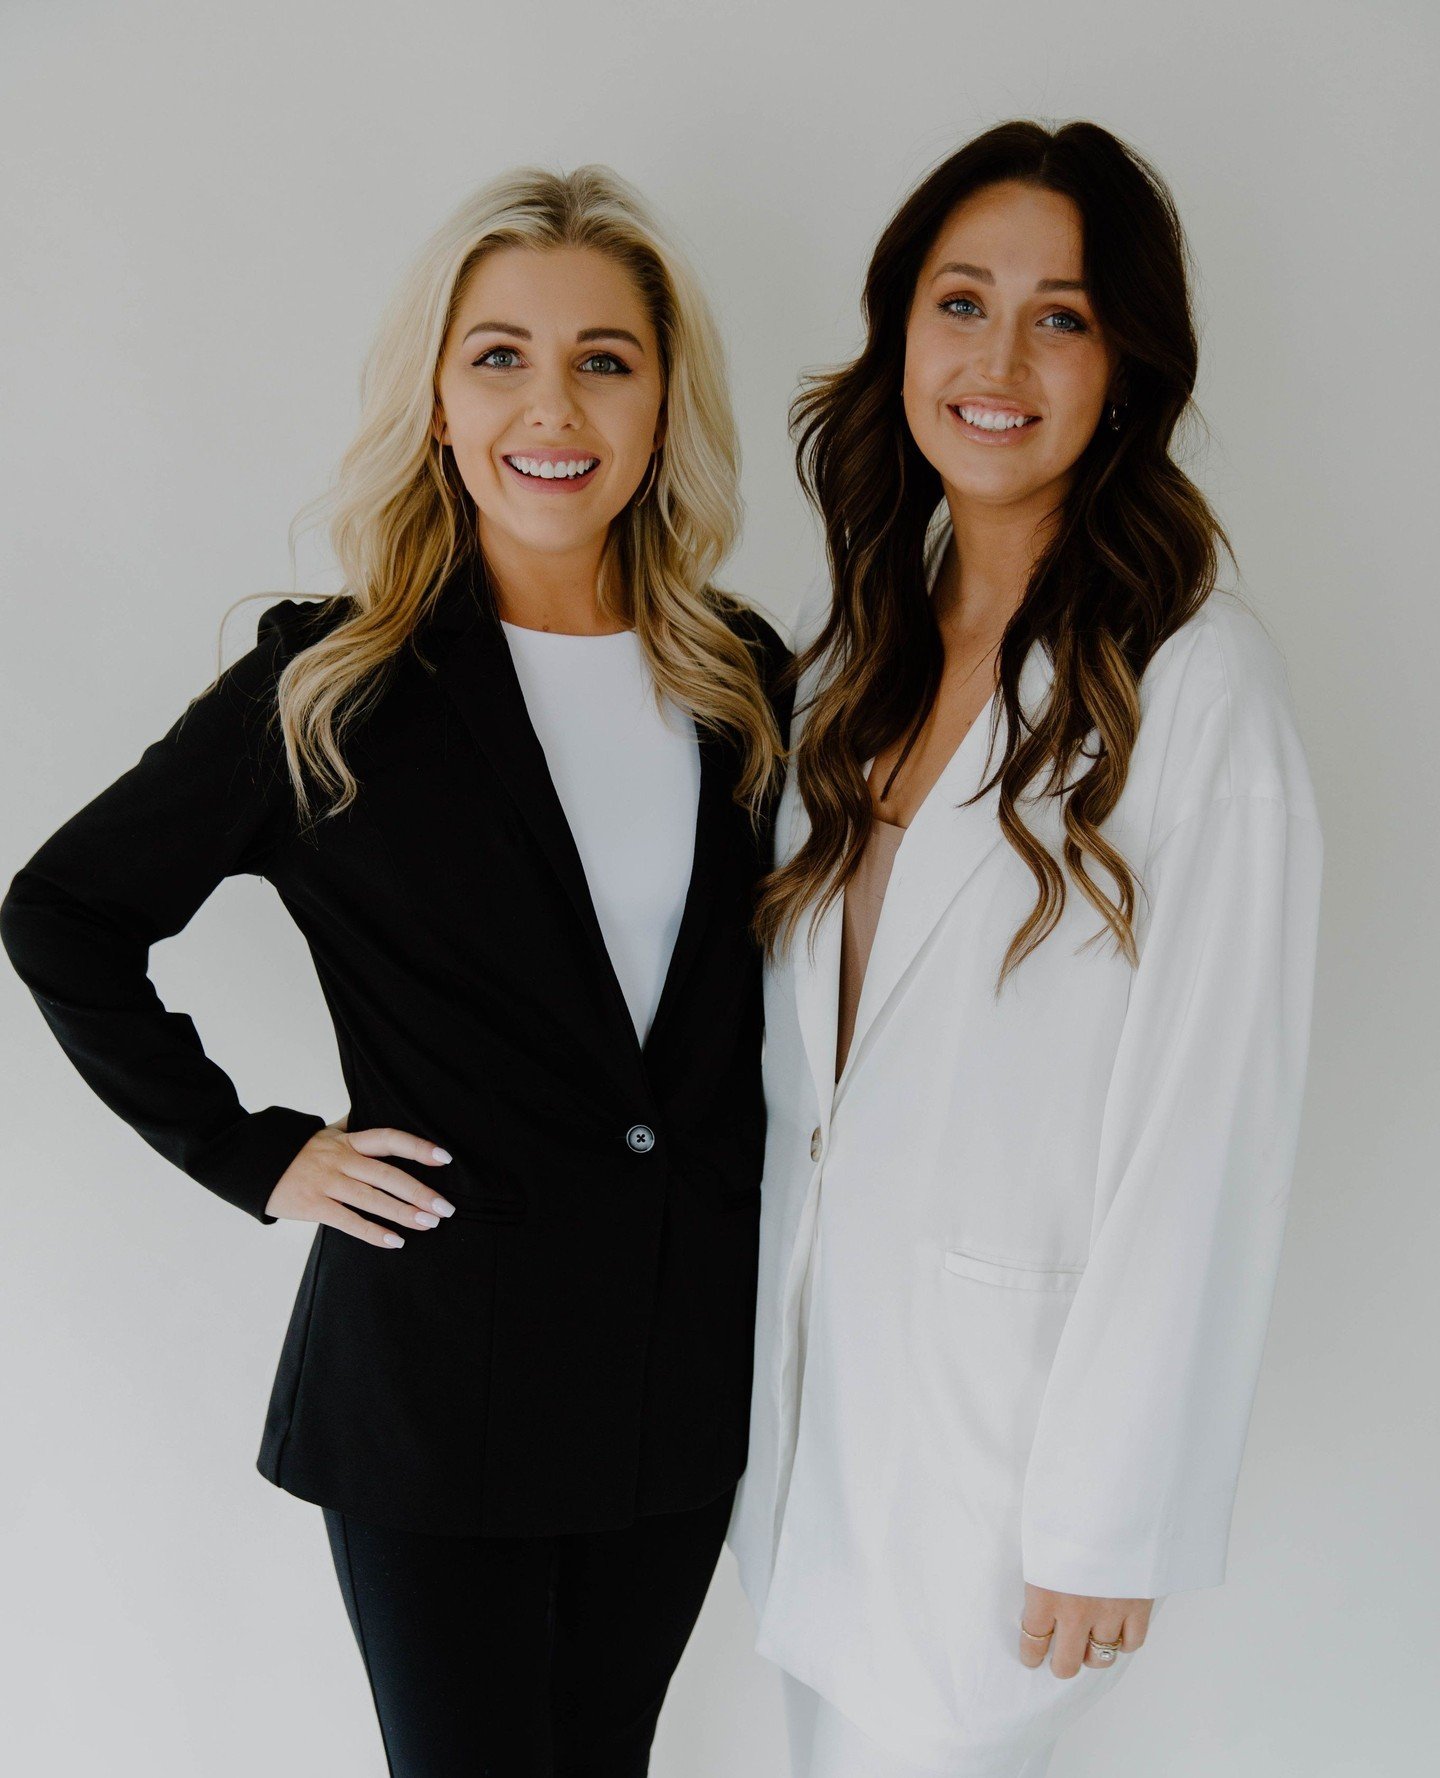 It's National Nurses week! Shoutout to all of the nurses, but especially our favorite Nurse Practitioners, Taylor Bishop &amp; Kenzie Driggers! 🤍 You two are so knowledgeable, amazing at your work, and keep us all looking beautiful! 😉 We all apprec